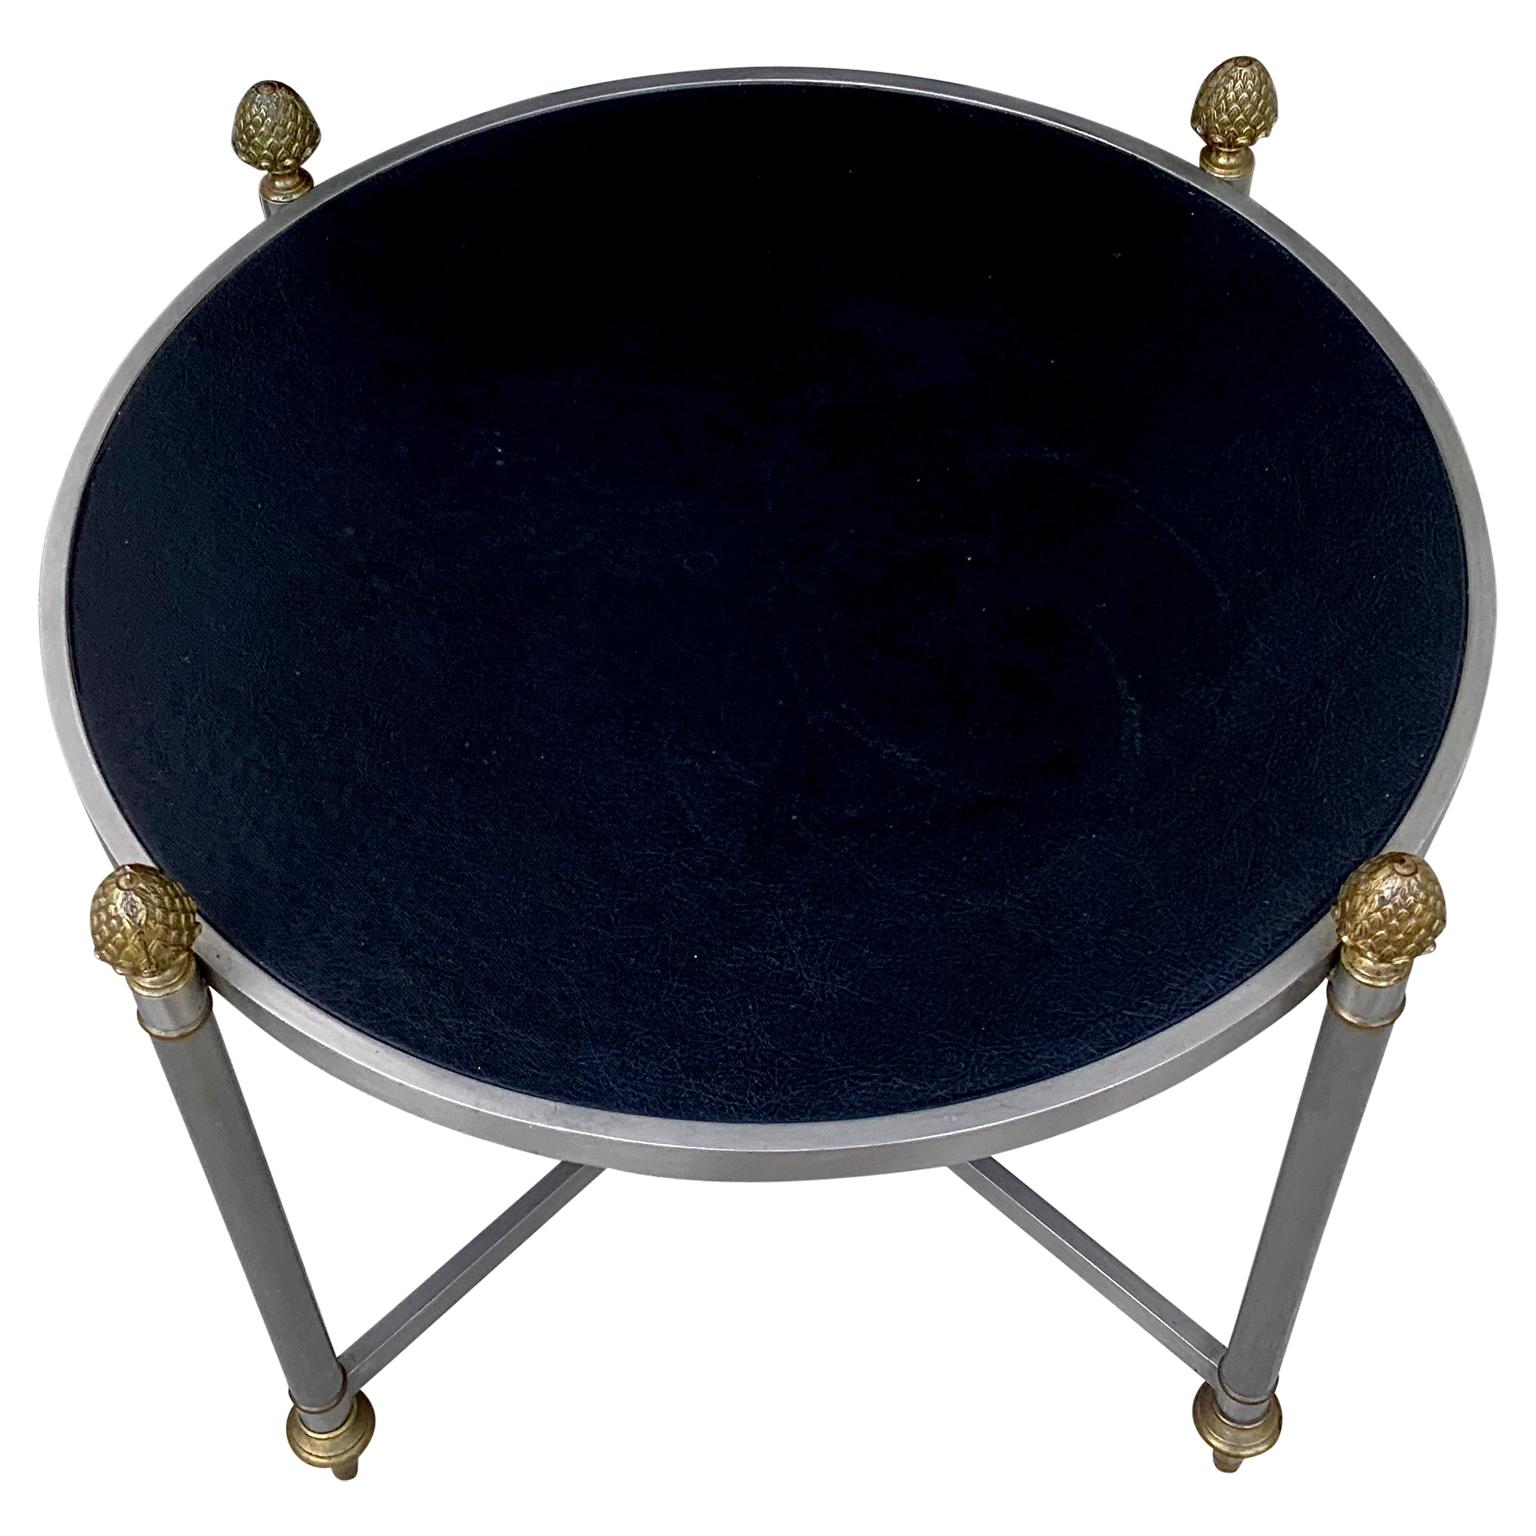 A vintage neoclassical Maison Jansen cocktail table. Classic design with brass pinecone finials, brushed steel and black leatherette top.